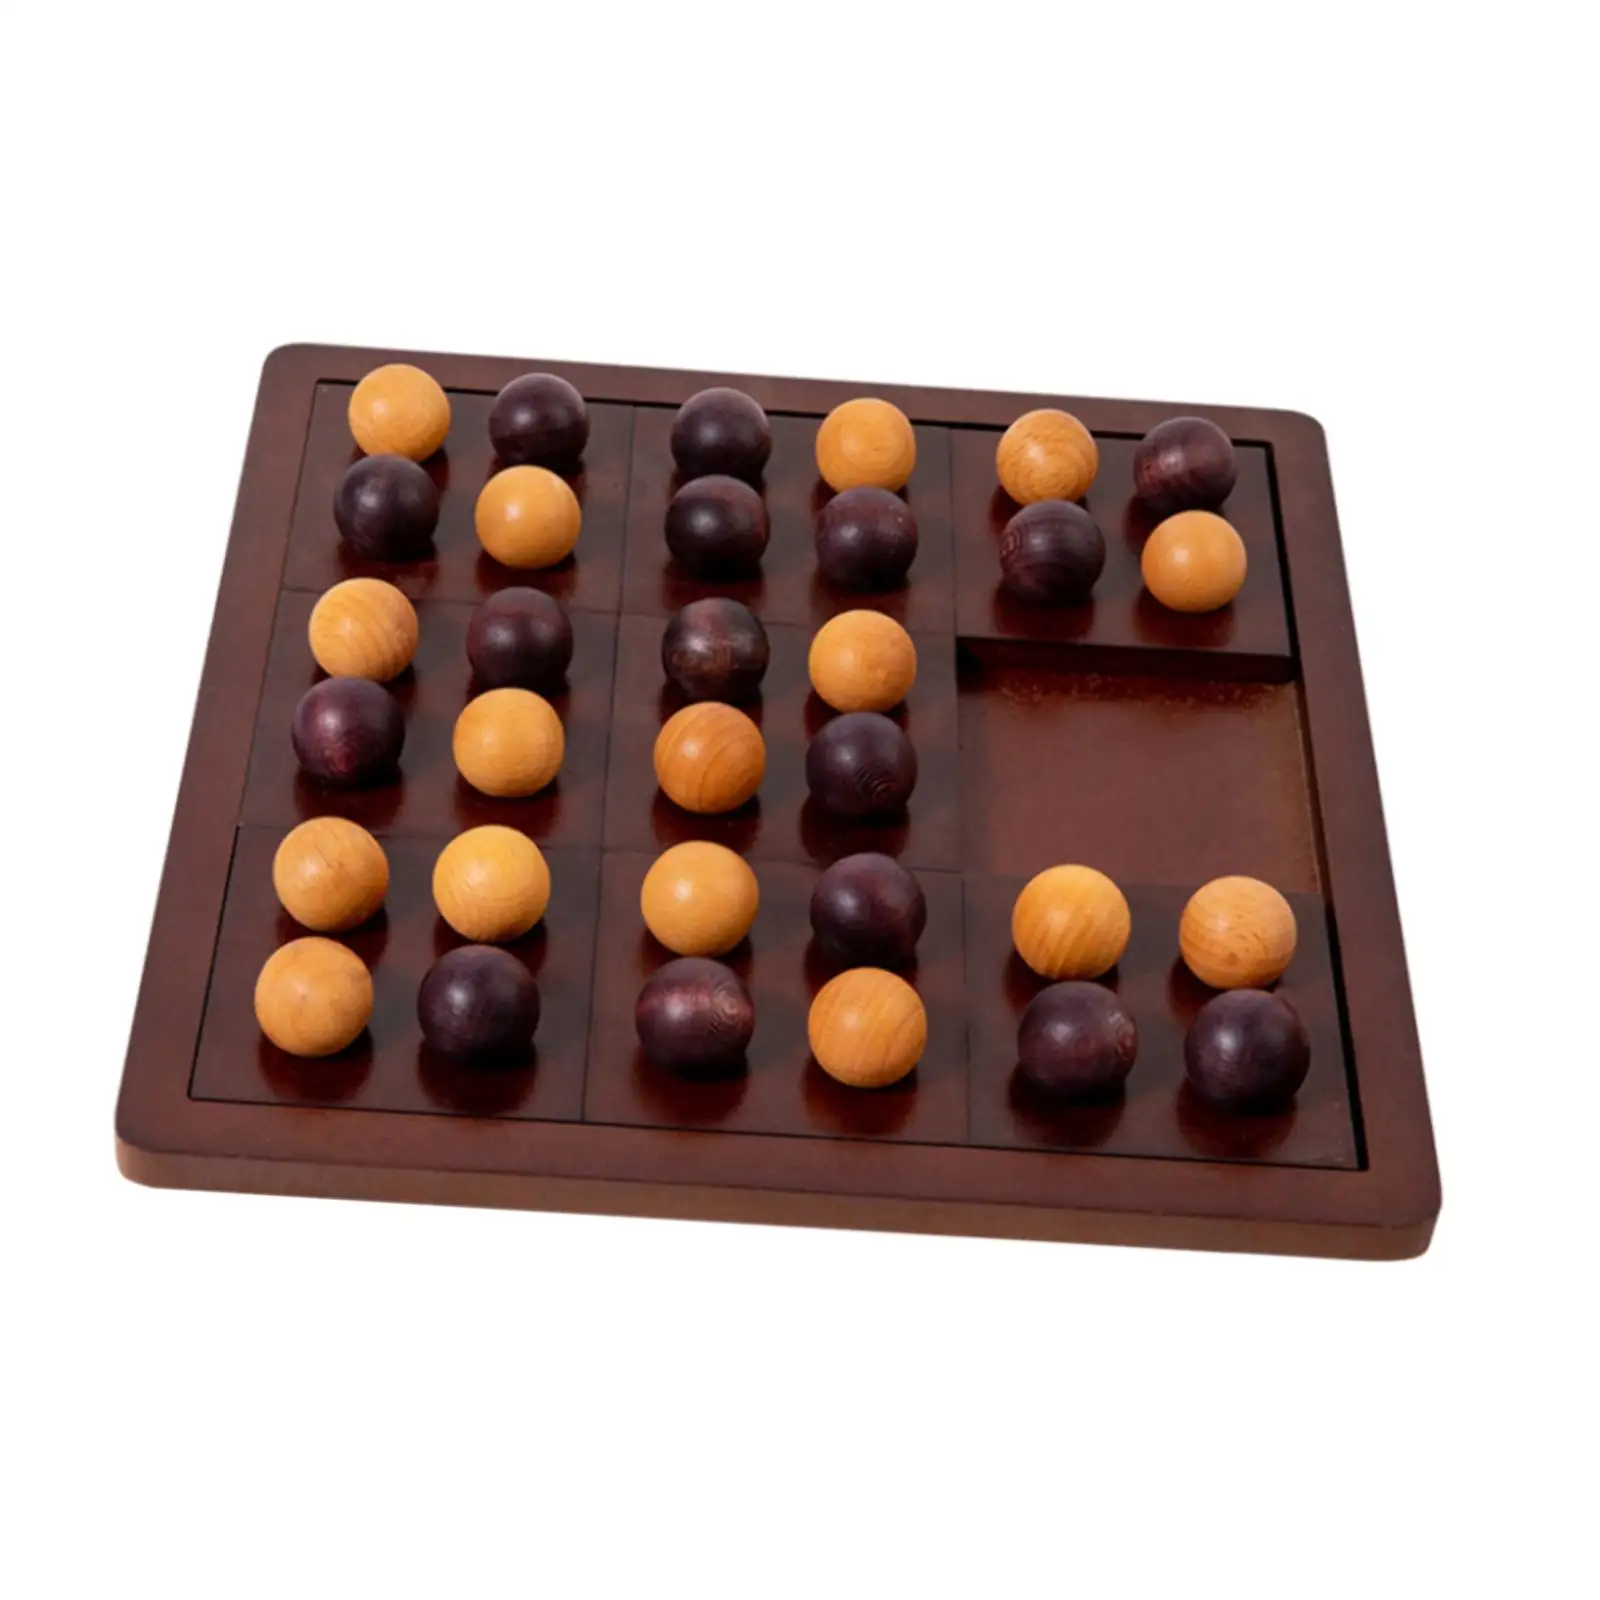 Tic TAC Toe Game Interactive Classic Early Education Puzzle for Indoor Outdoor Children Adults Party Favors Travel Plane Trips